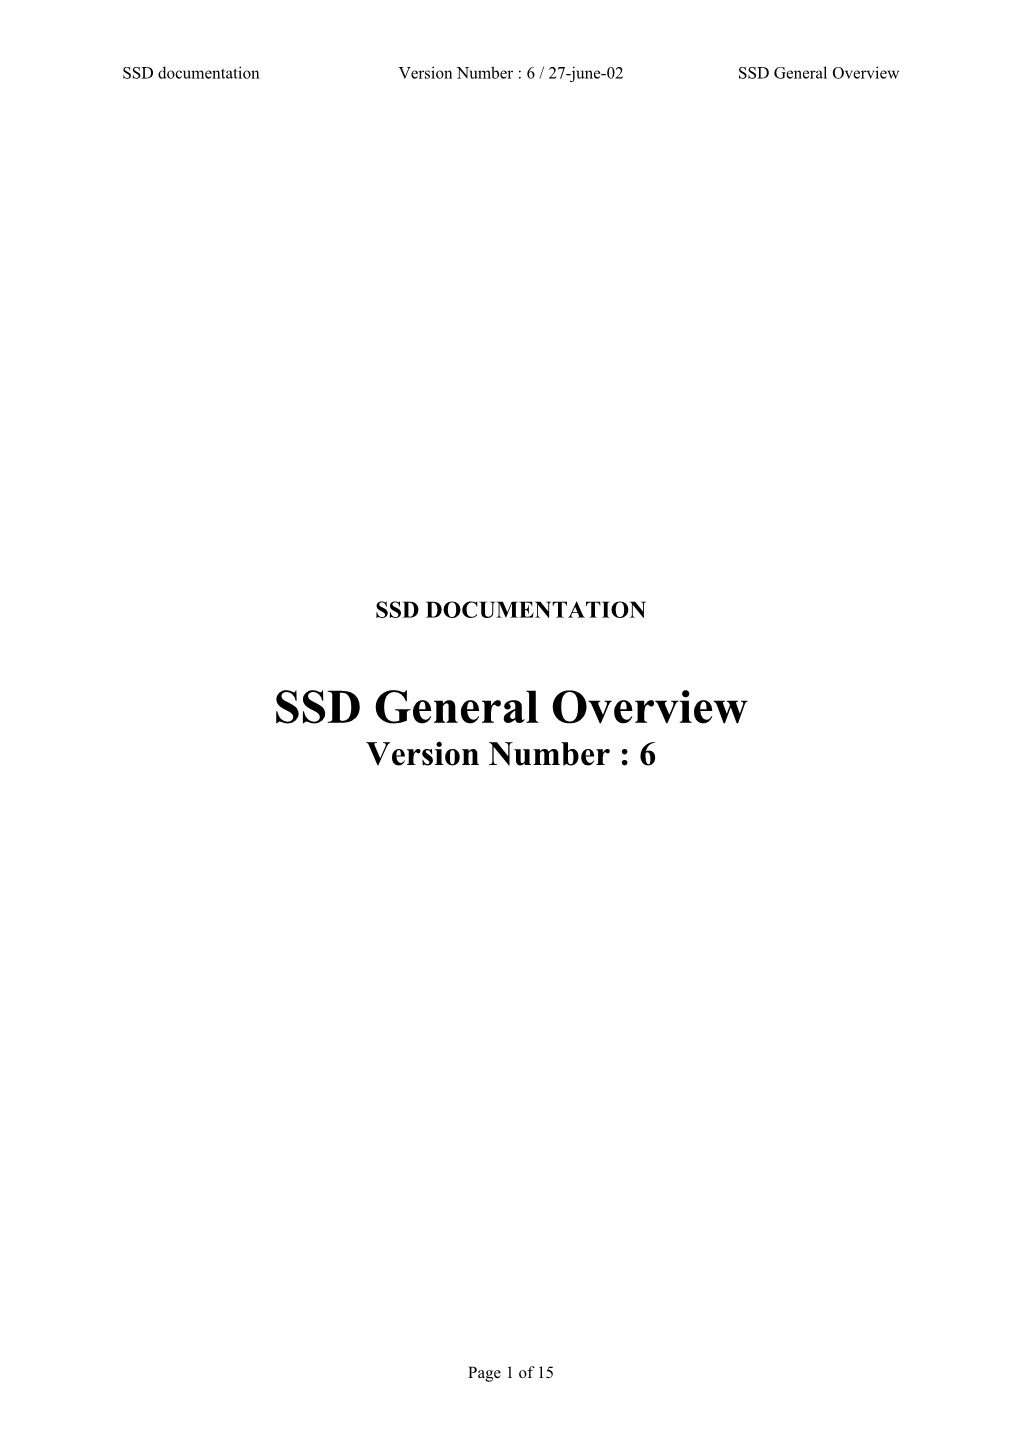 Document for the SSD Integration and Installation Review in STAR